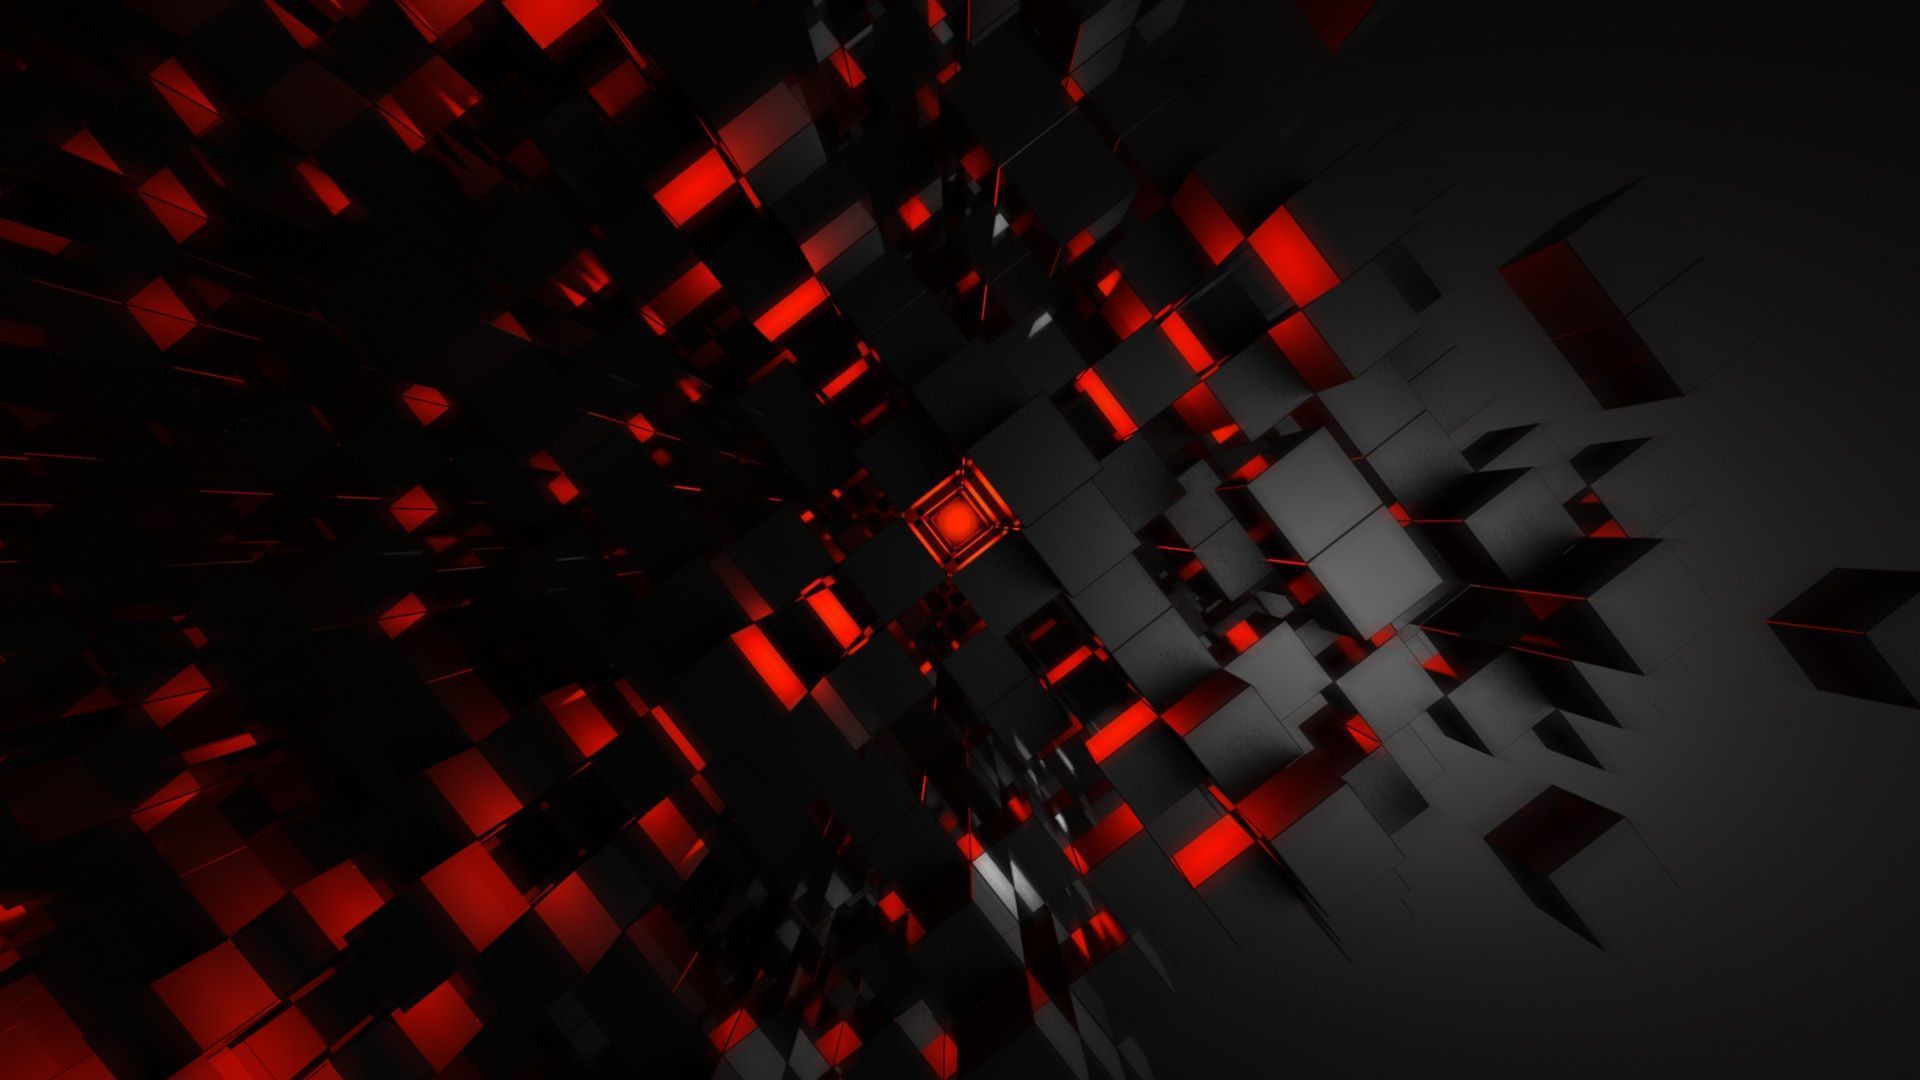 Red Wallpaper, Black And Red Wallpaper